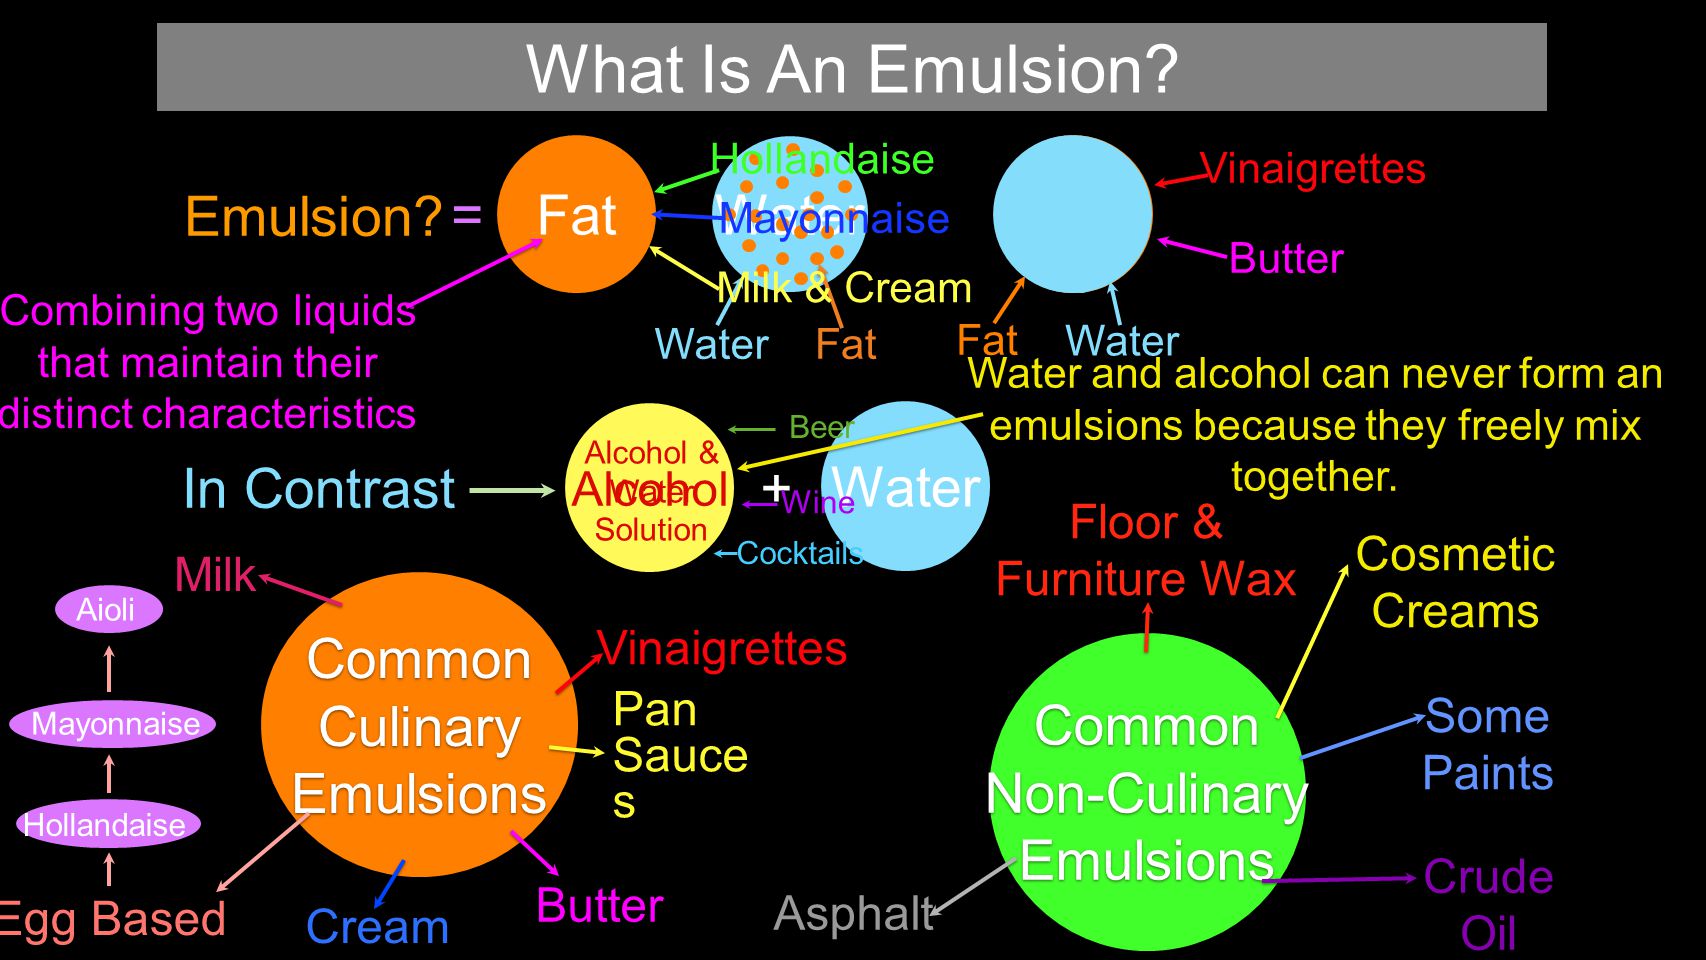 Food Science Corner: What are emulsions? - An exclusive community